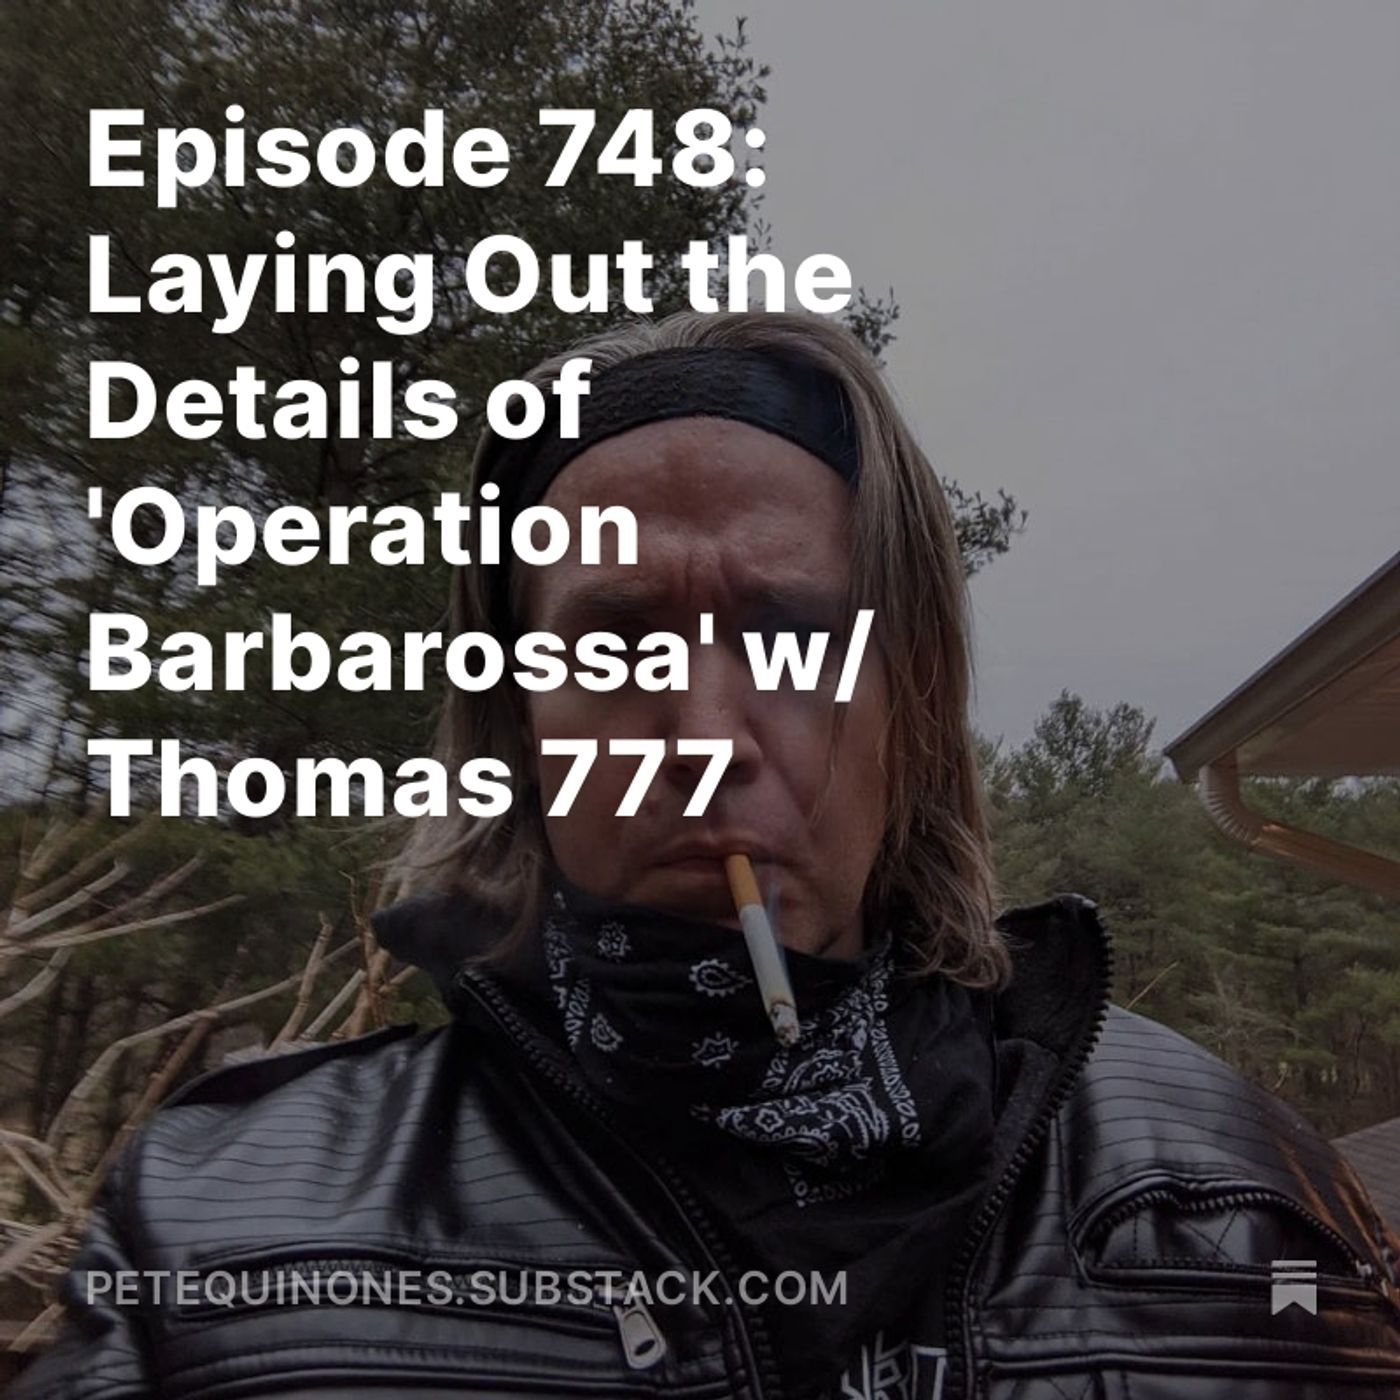 Episode 748: The WW2 Series Part 9 - Laying Out the Details of 'Operation Barbarossa' w/ Thomas 777